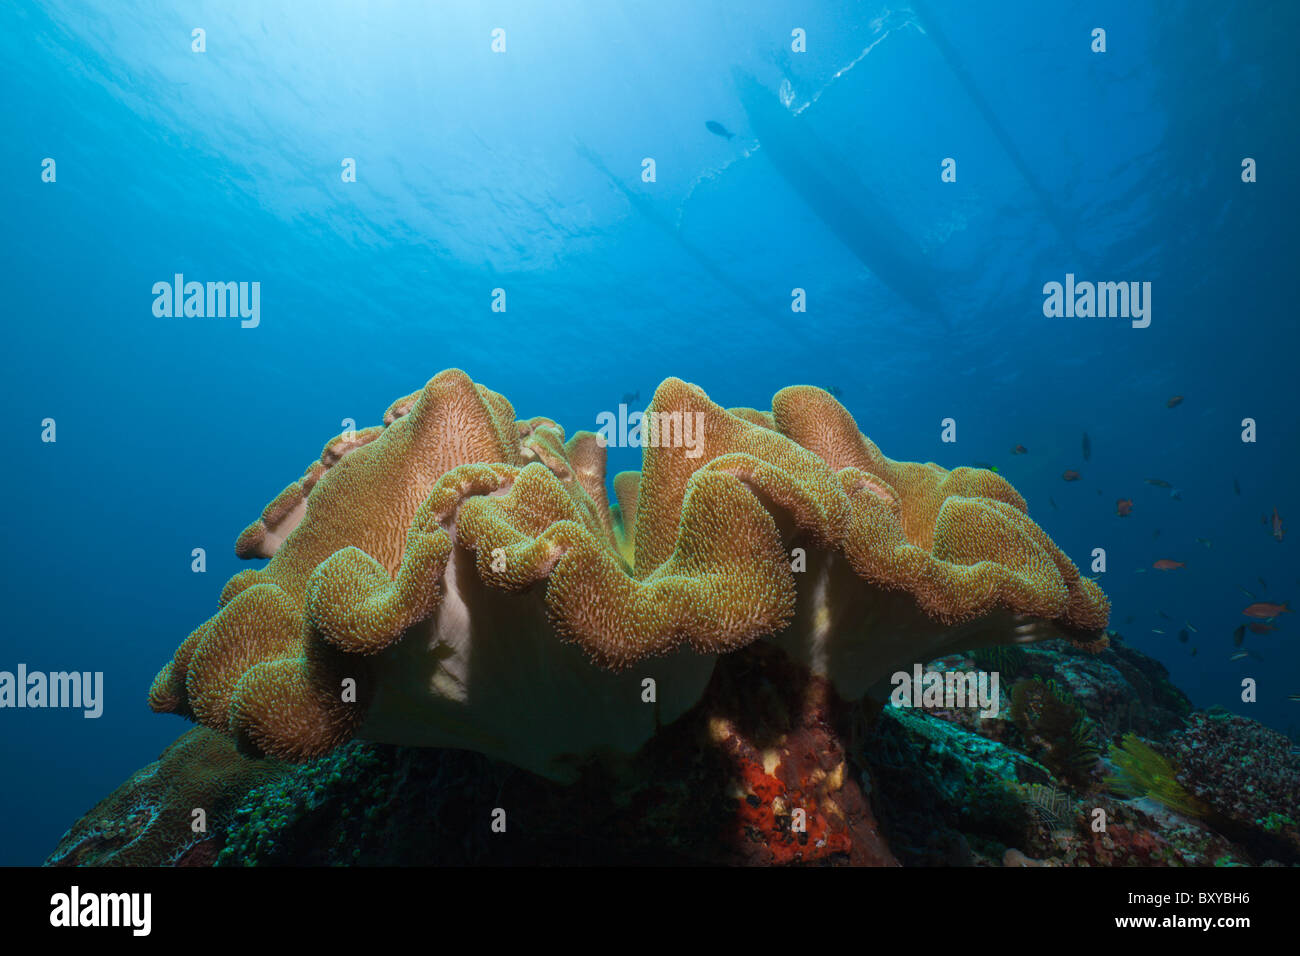 Mushroom Leather Coral in Reef, Sarcophyton sp., Candidasa, Bali, Indonesia Stock Photo